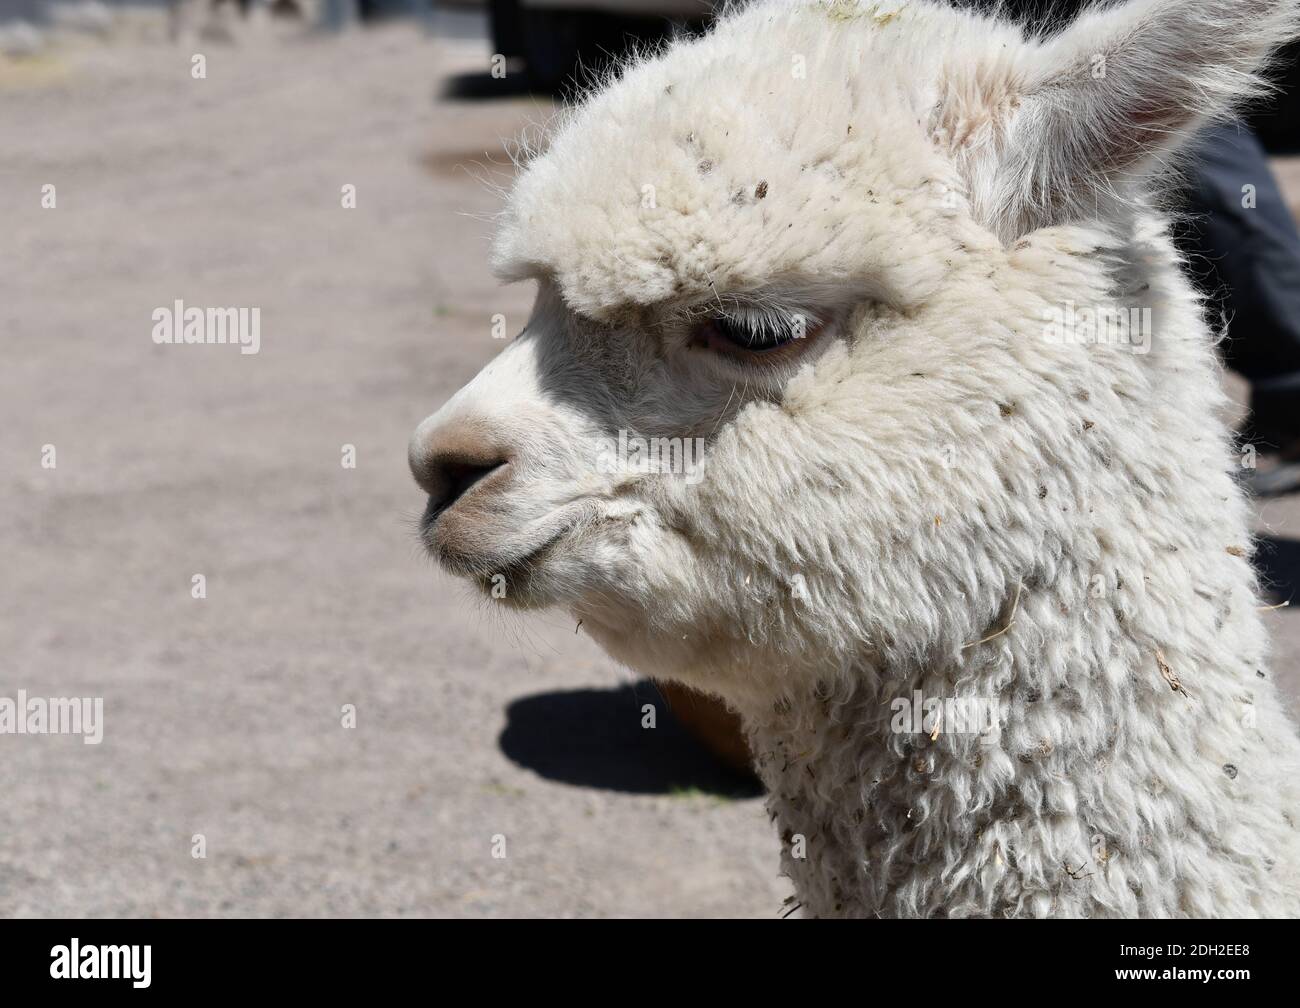 Alpaca close-up portrait in Peru. Lamas and alpacas are the two domestic animals from the camel family in South America. Stock Photo